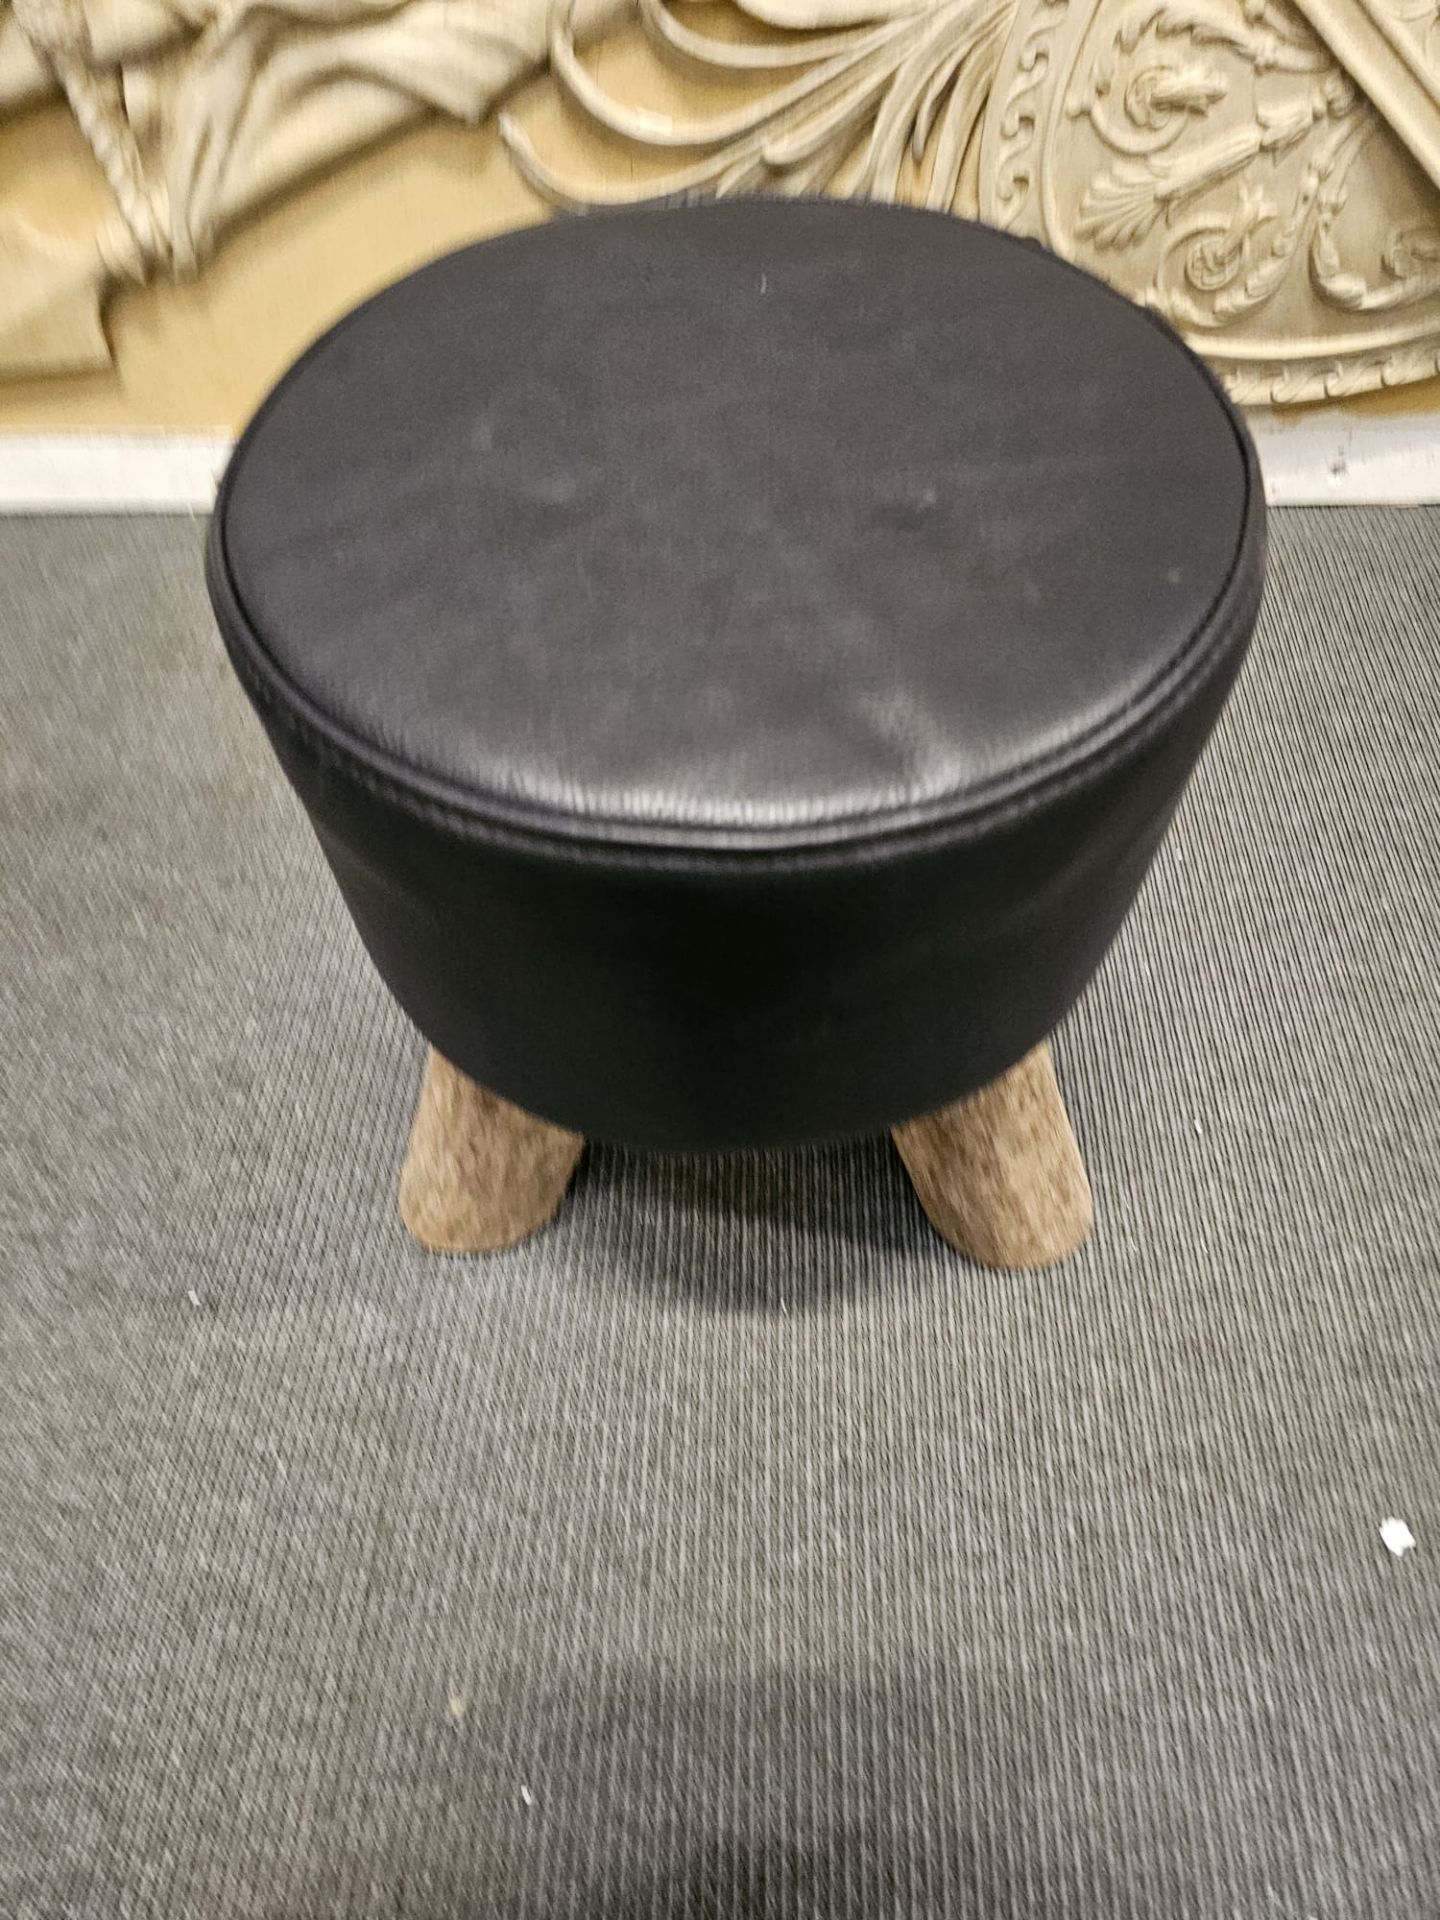 Bleu Nature F016 Mousse Driftwood And Leather Stool Finished In Matador Nero Hide Leather 380 x - Bild 2 aus 3